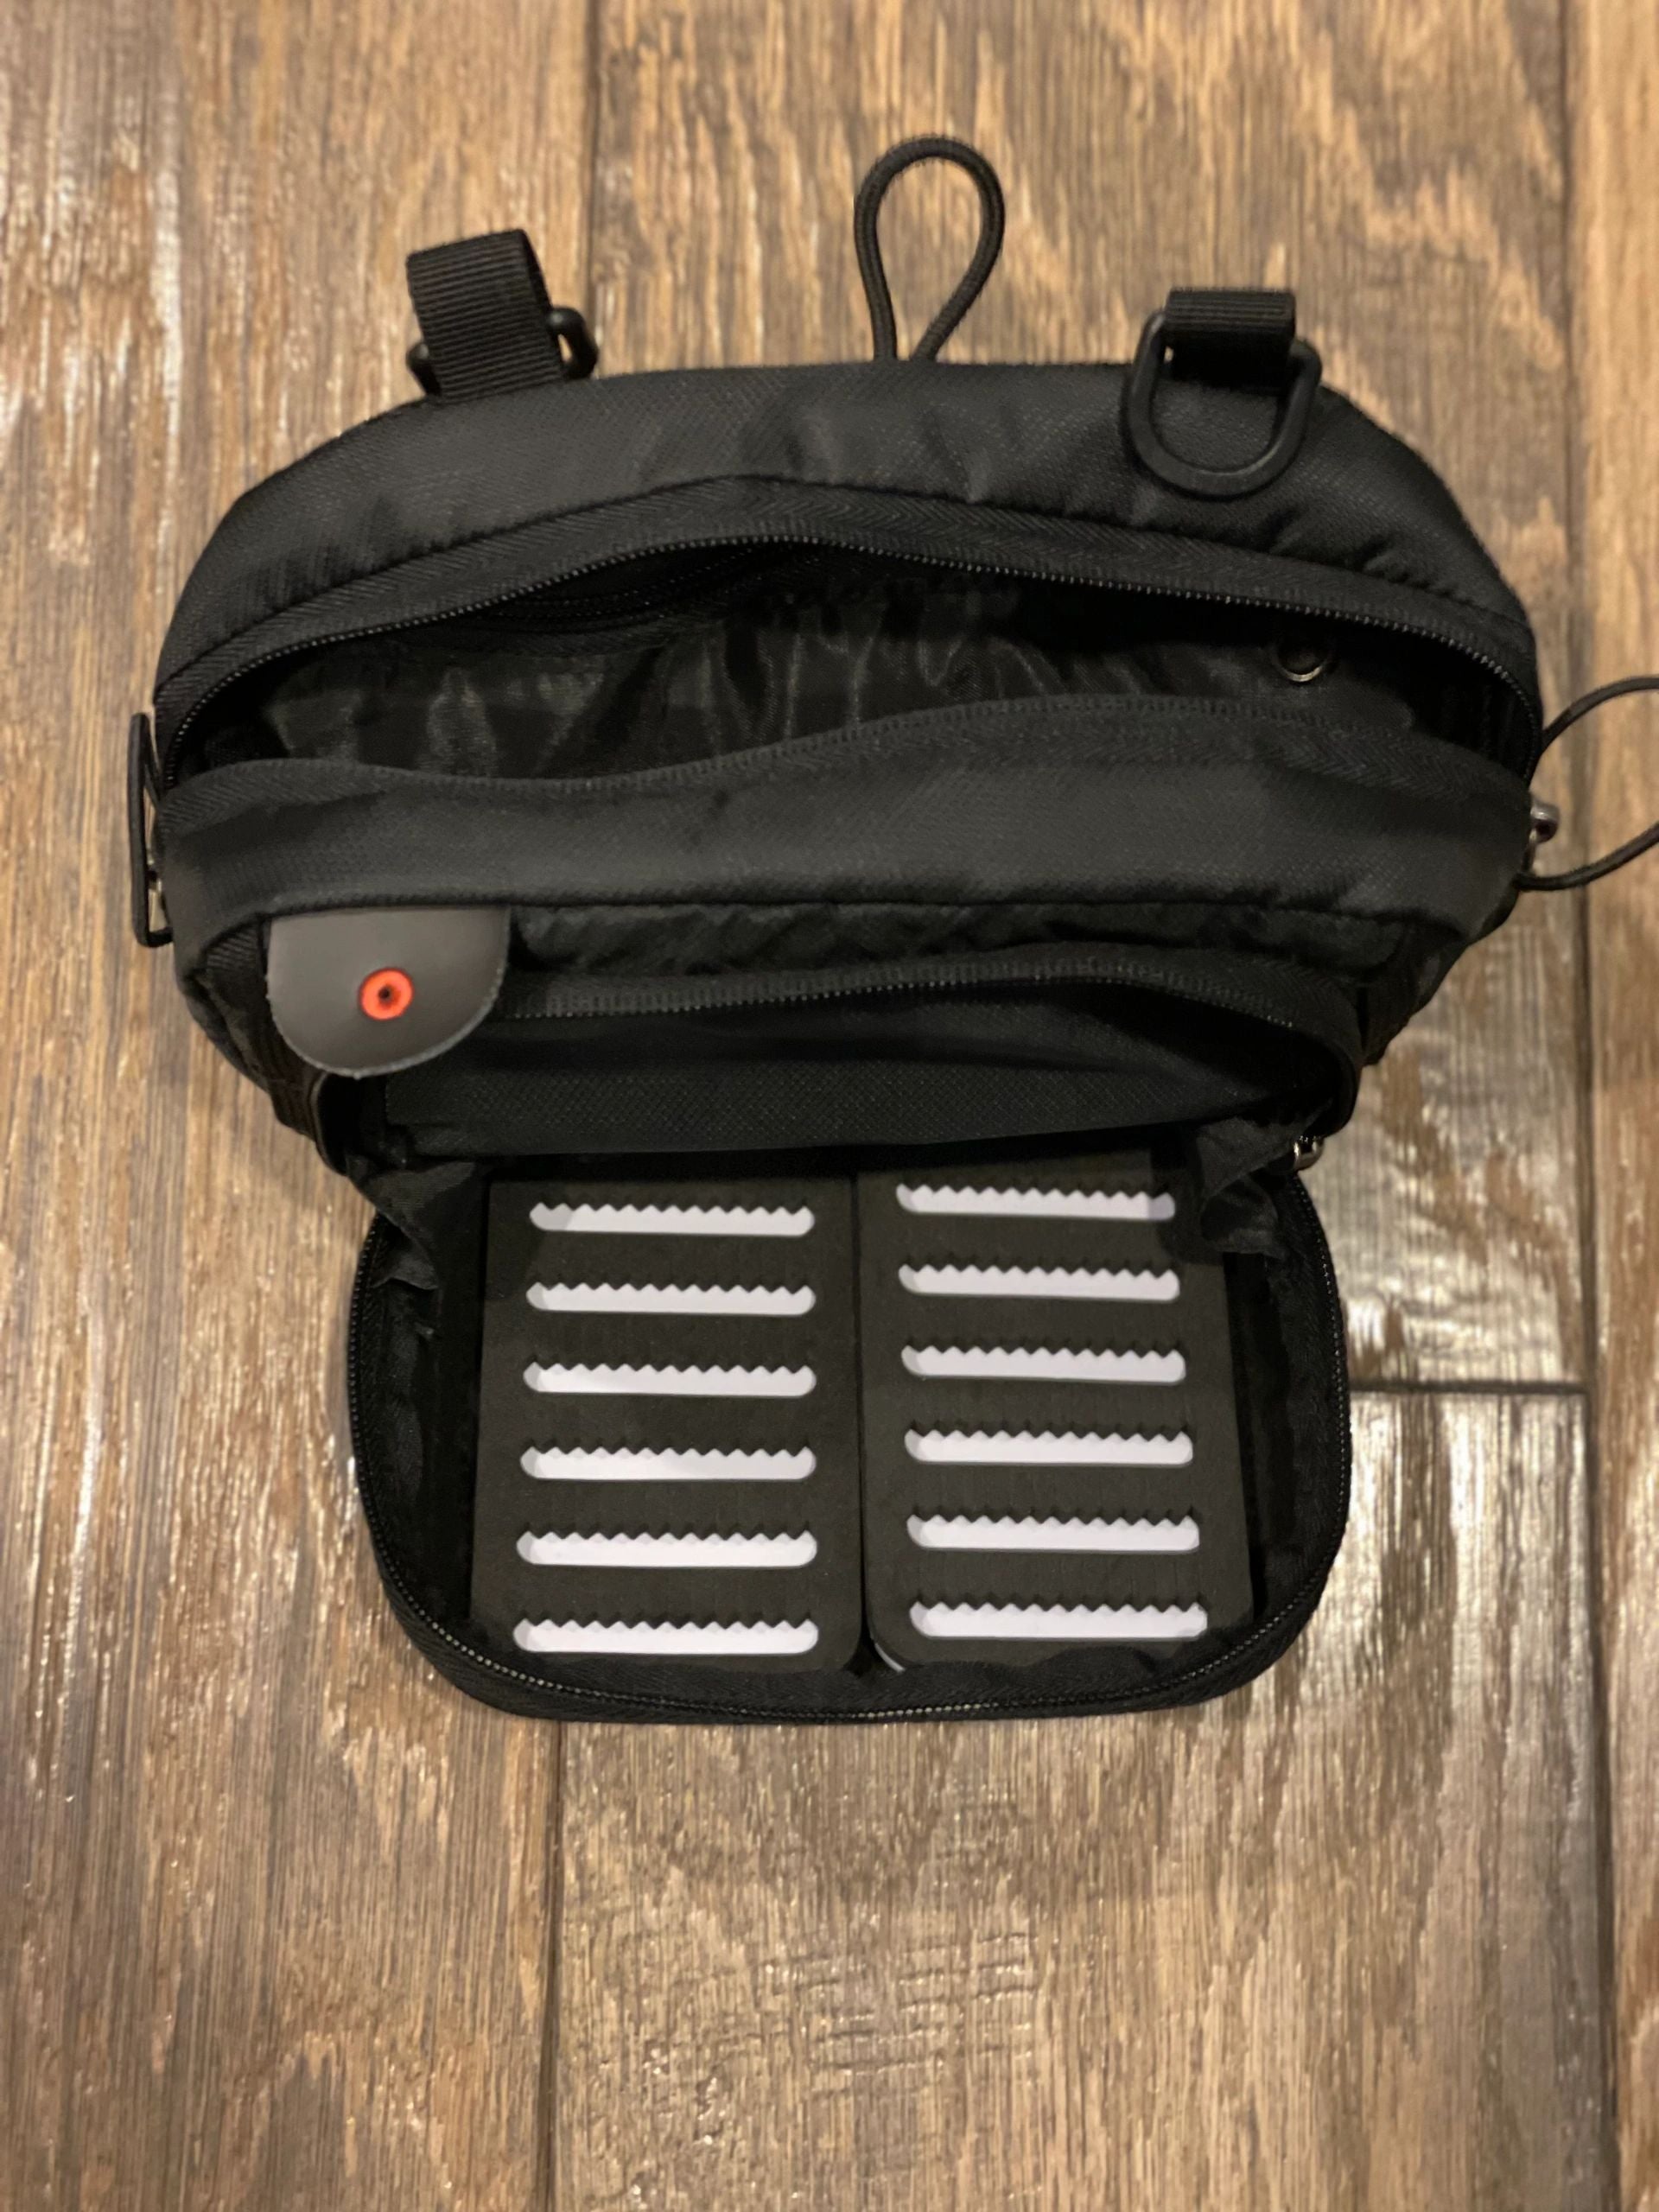 VERSA PACK FLY FISHING SYSTEM | BUDGET FRIENDLY VERSATILE FLY FISHING PACK | MINIMALIST FLY FISHING PACK